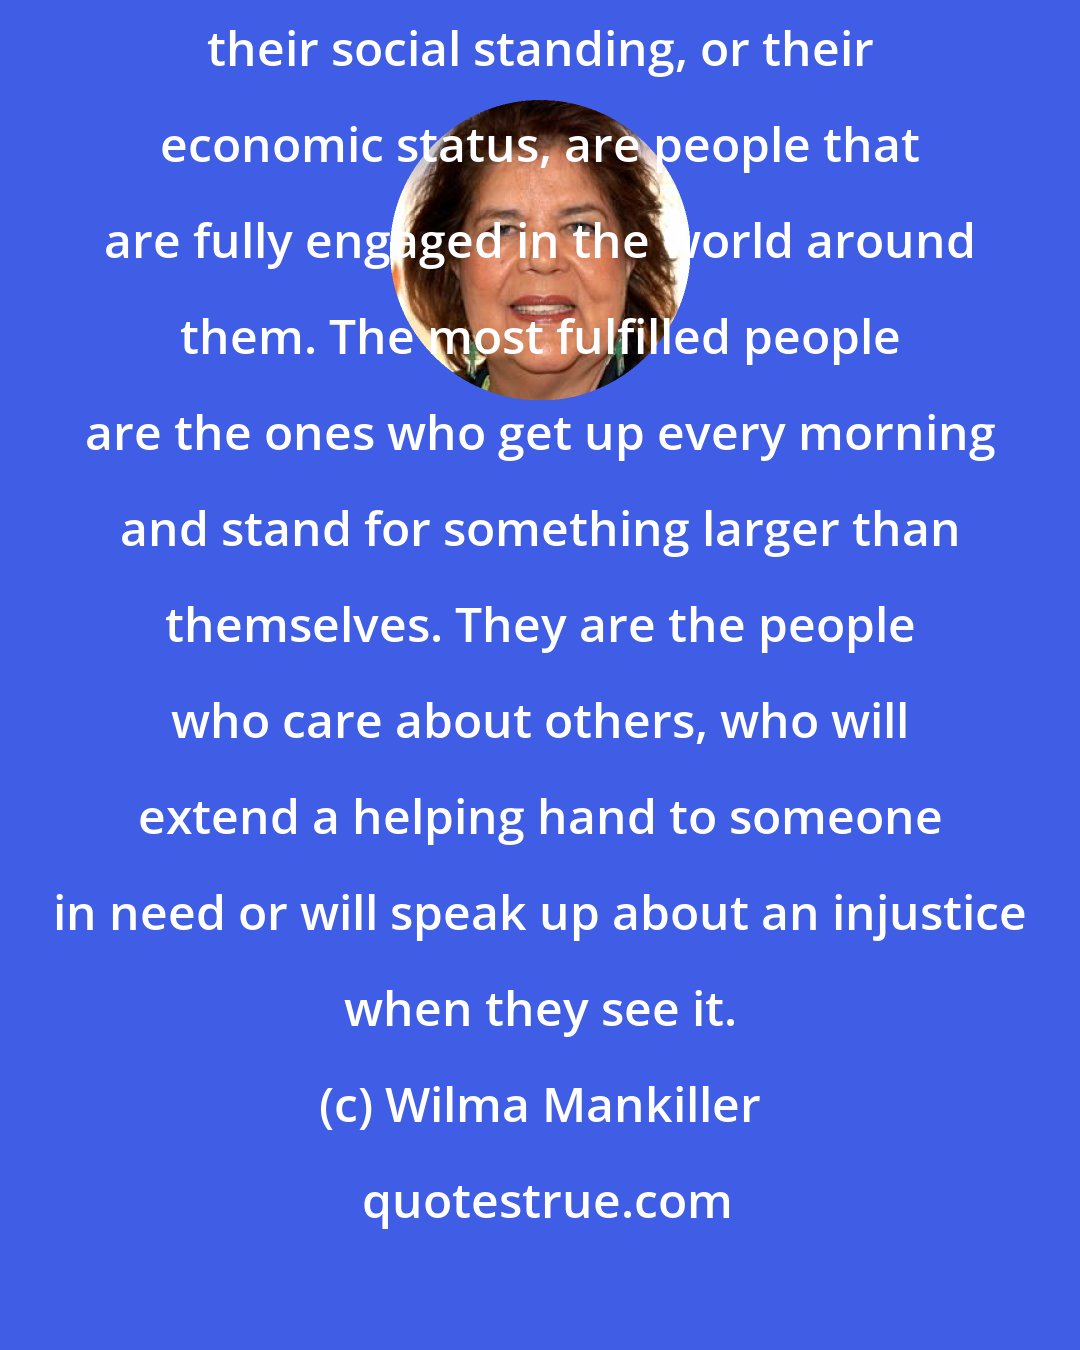 Wilma Mankiller: The happiest people I've ever met, regardless of their profession, their social standing, or their economic status, are people that are fully engaged in the world around them. The most fulfilled people are the ones who get up every morning and stand for something larger than themselves. They are the people who care about others, who will extend a helping hand to someone in need or will speak up about an injustice when they see it.